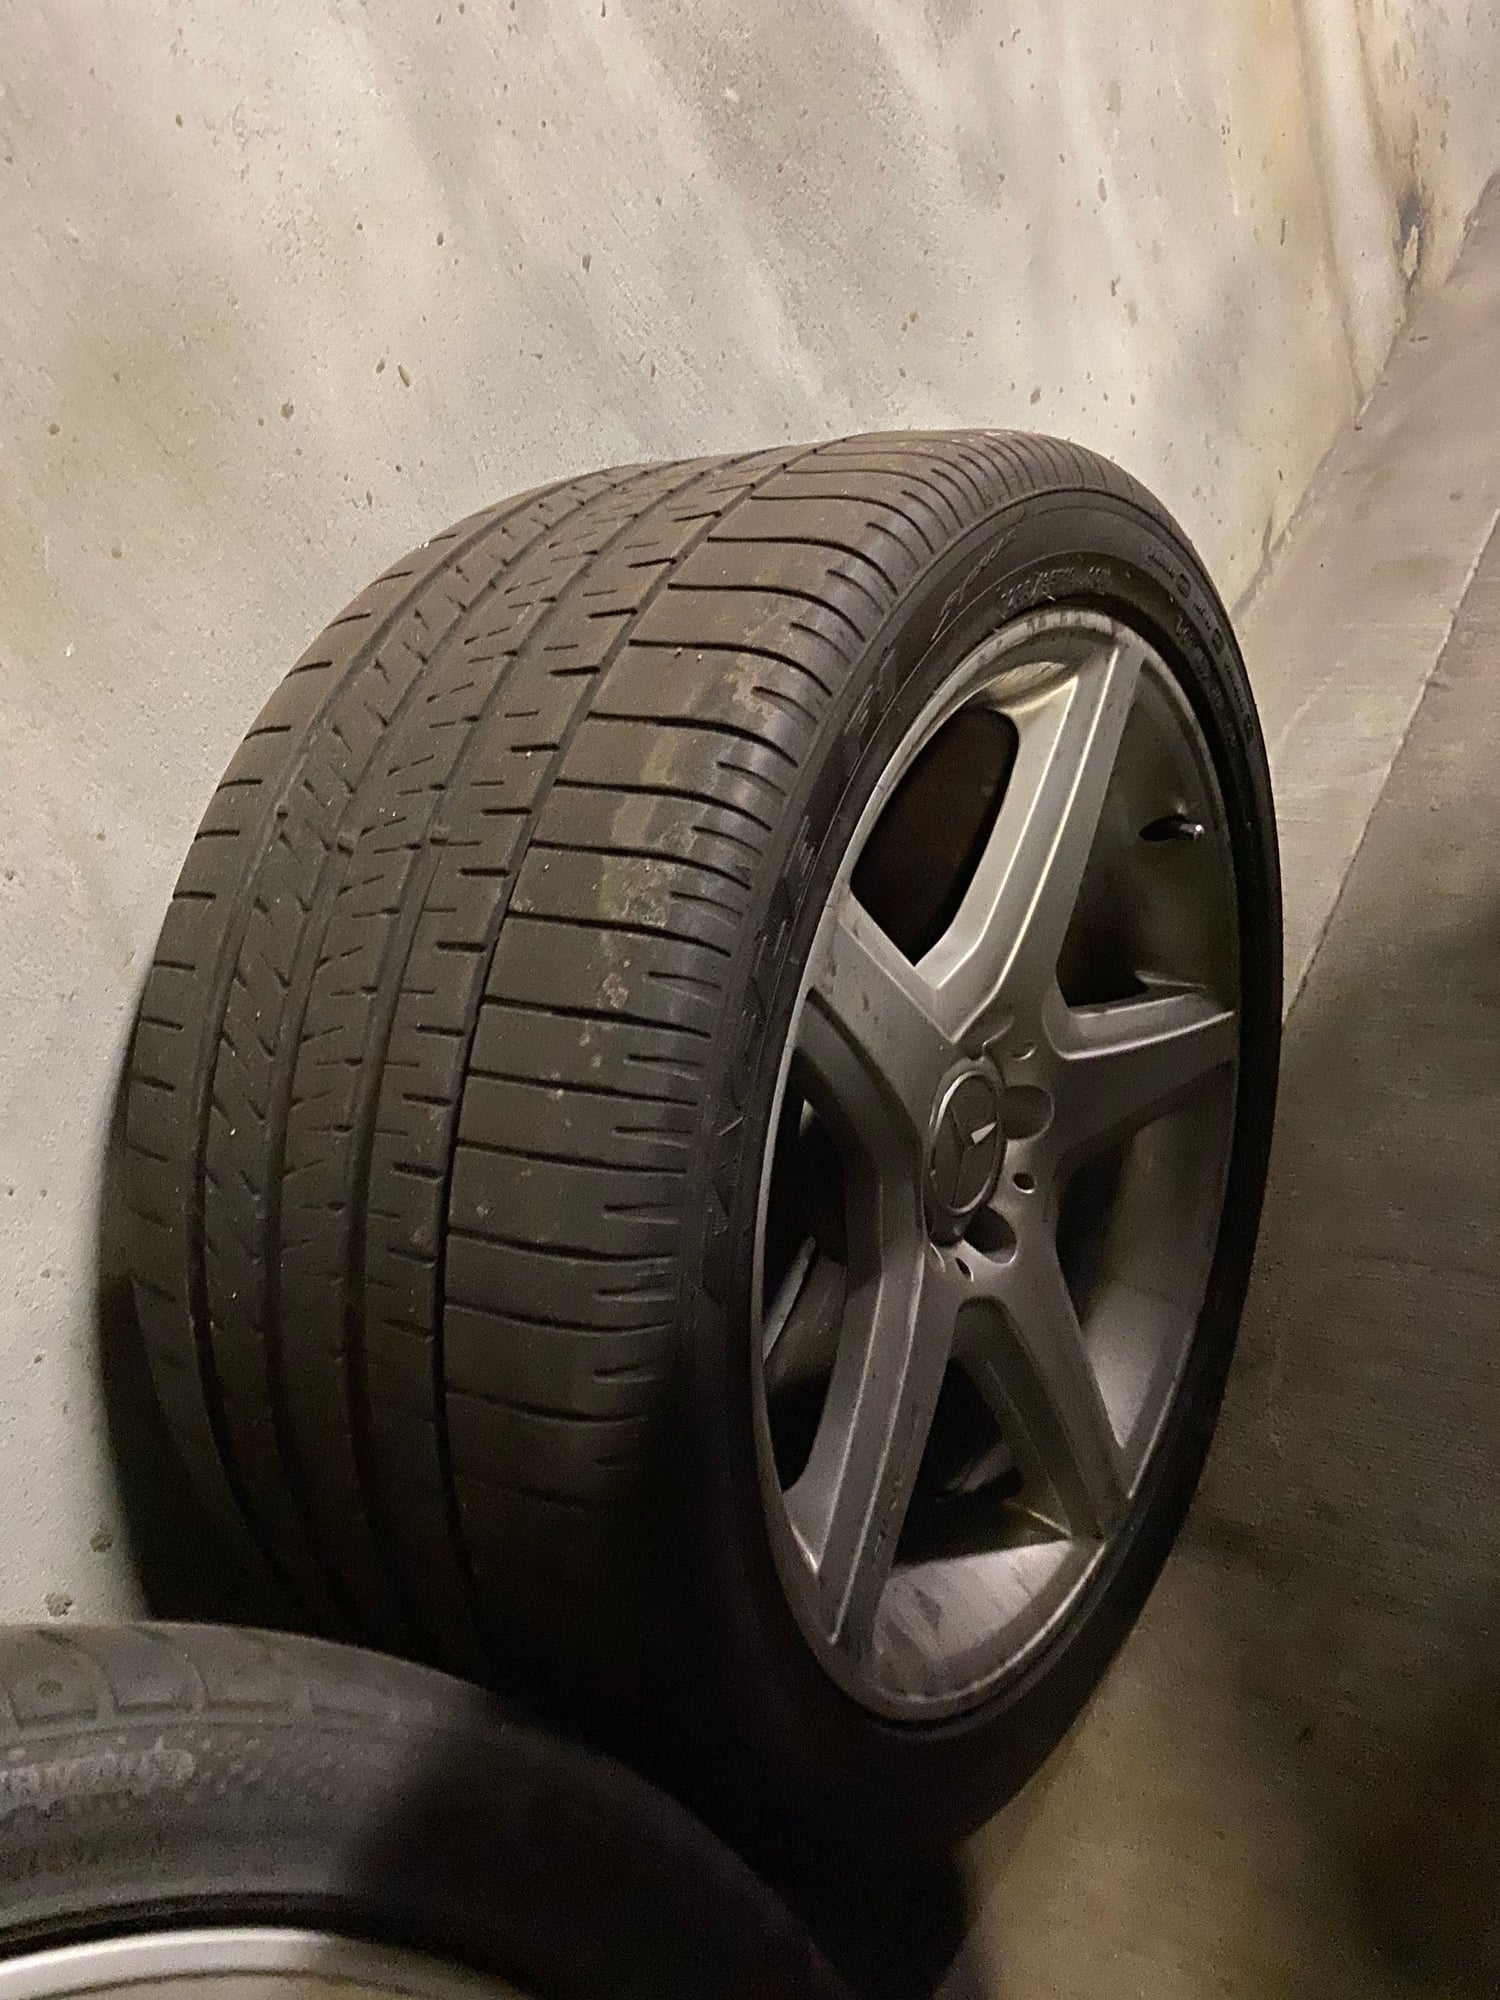 Wheels and Tires/Axles - 2 oem cls 55 wheels/tires for sale - individual or both - Used - Los Angeles, CA 90046, United States